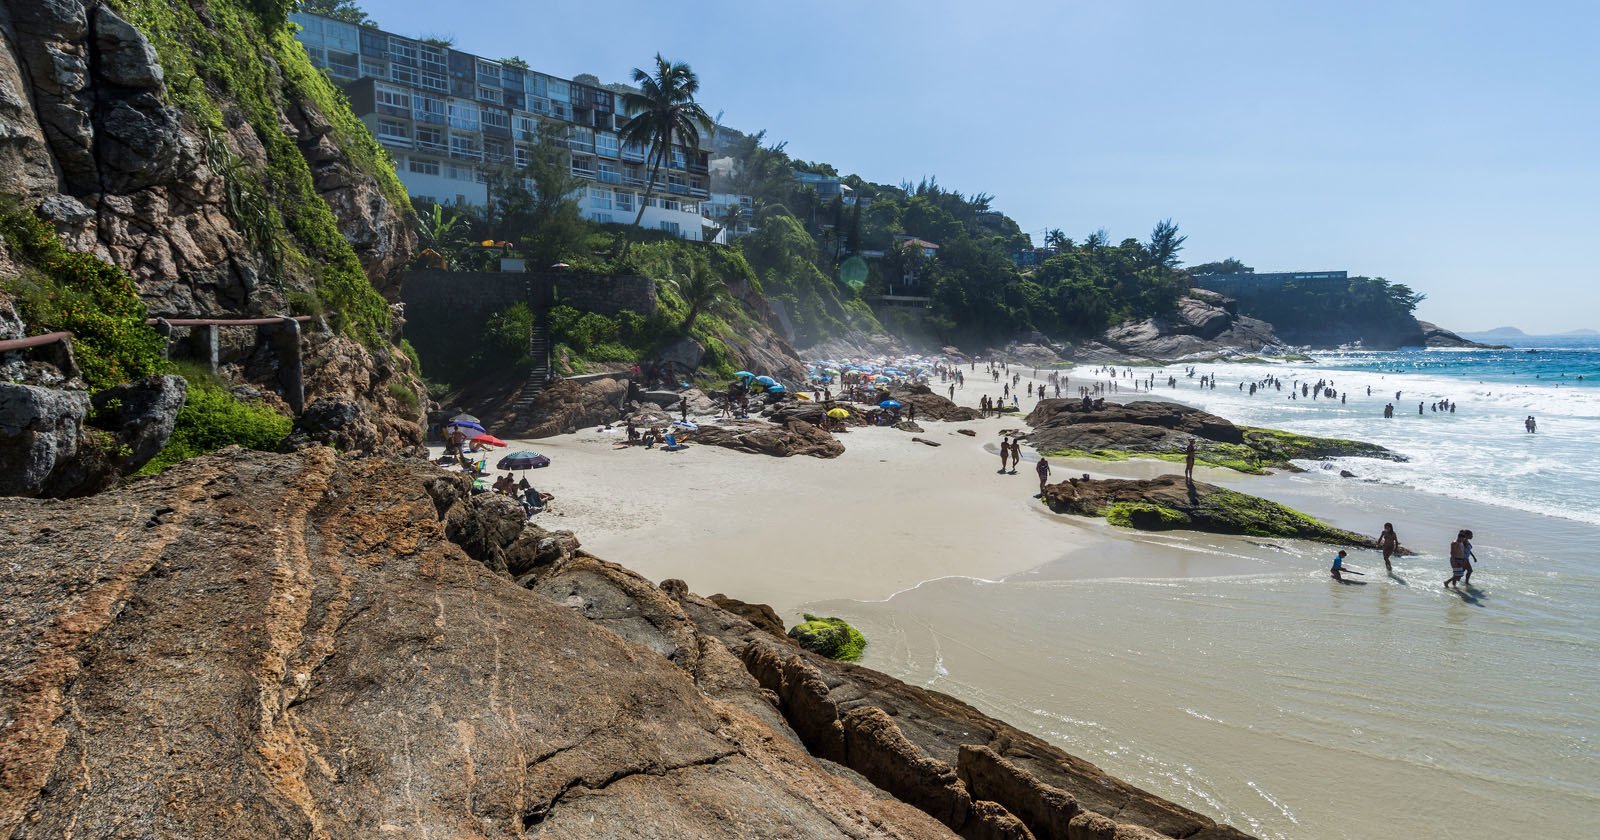 Man Falls 40 Feet to his Death While Taking a Selfie Above Beach in Brazil